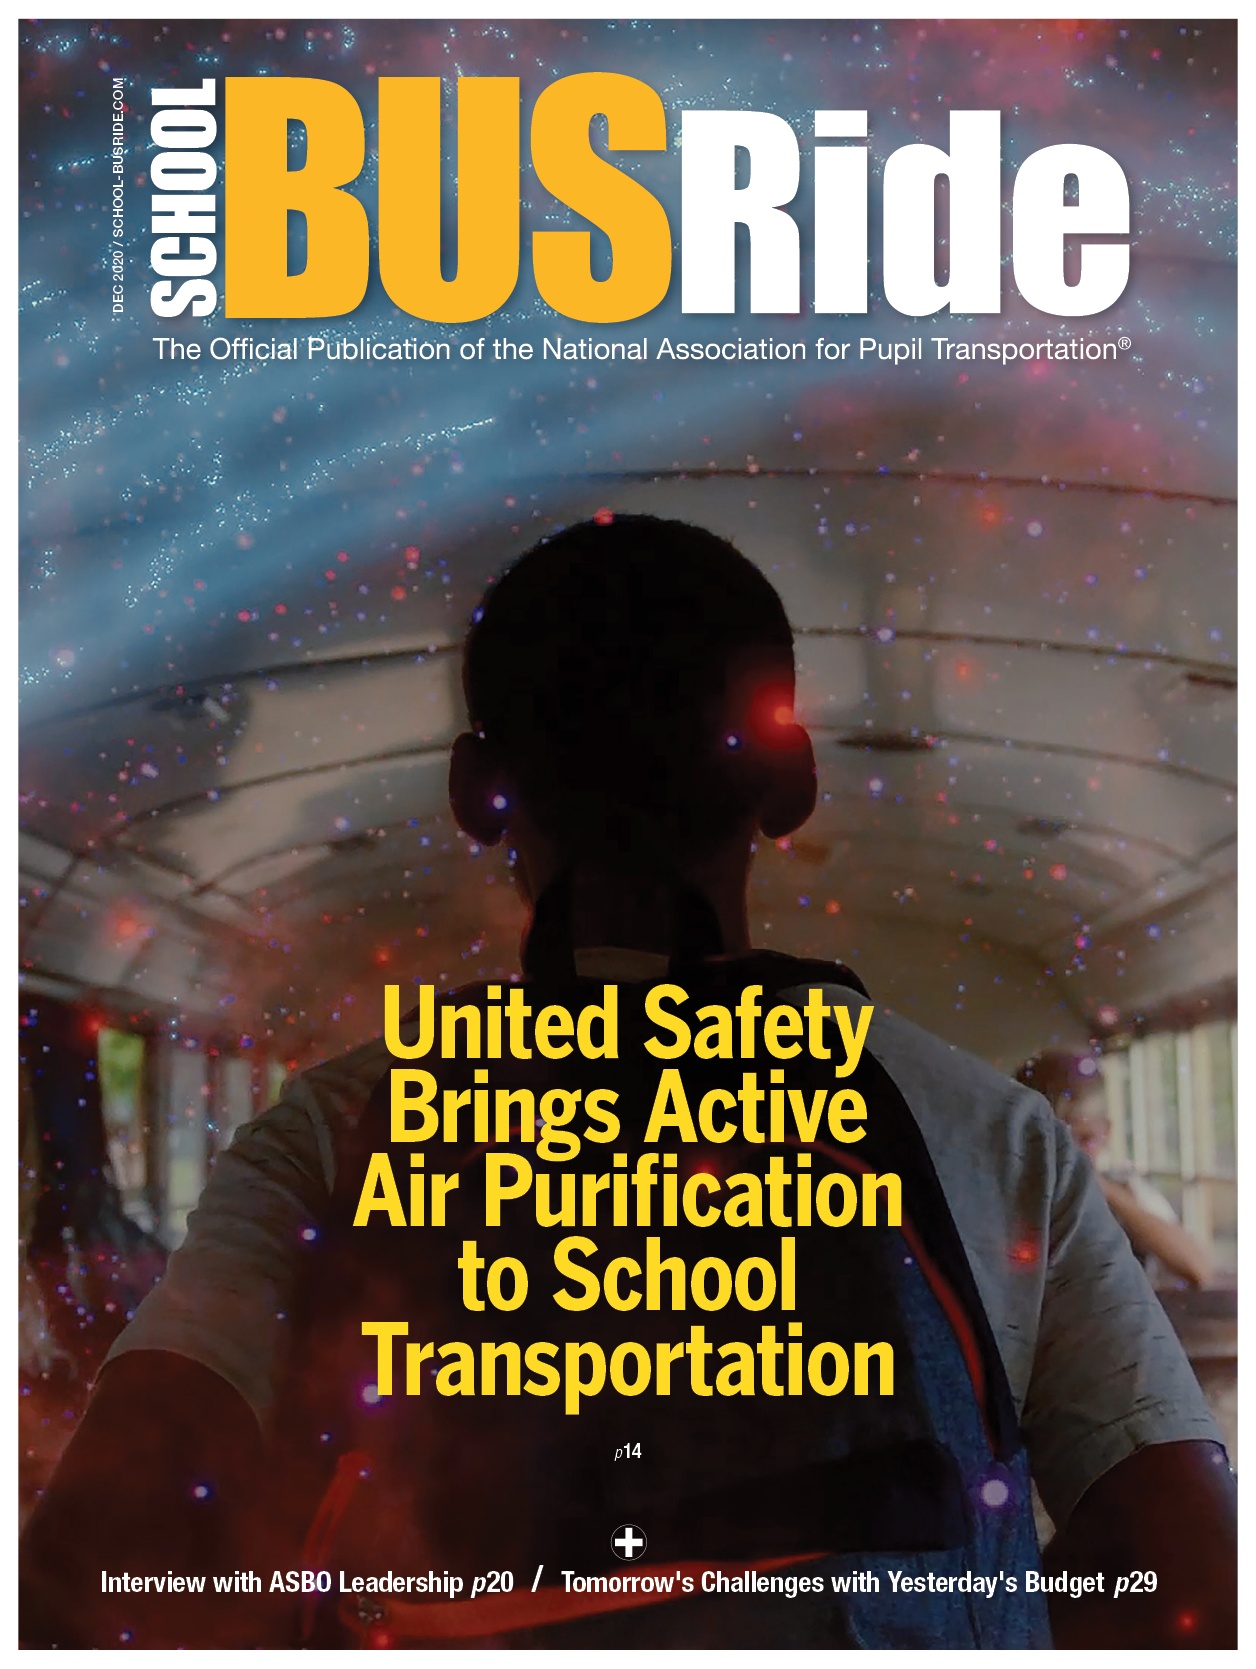 United Safety Brings Active Air Purification to School Transportation